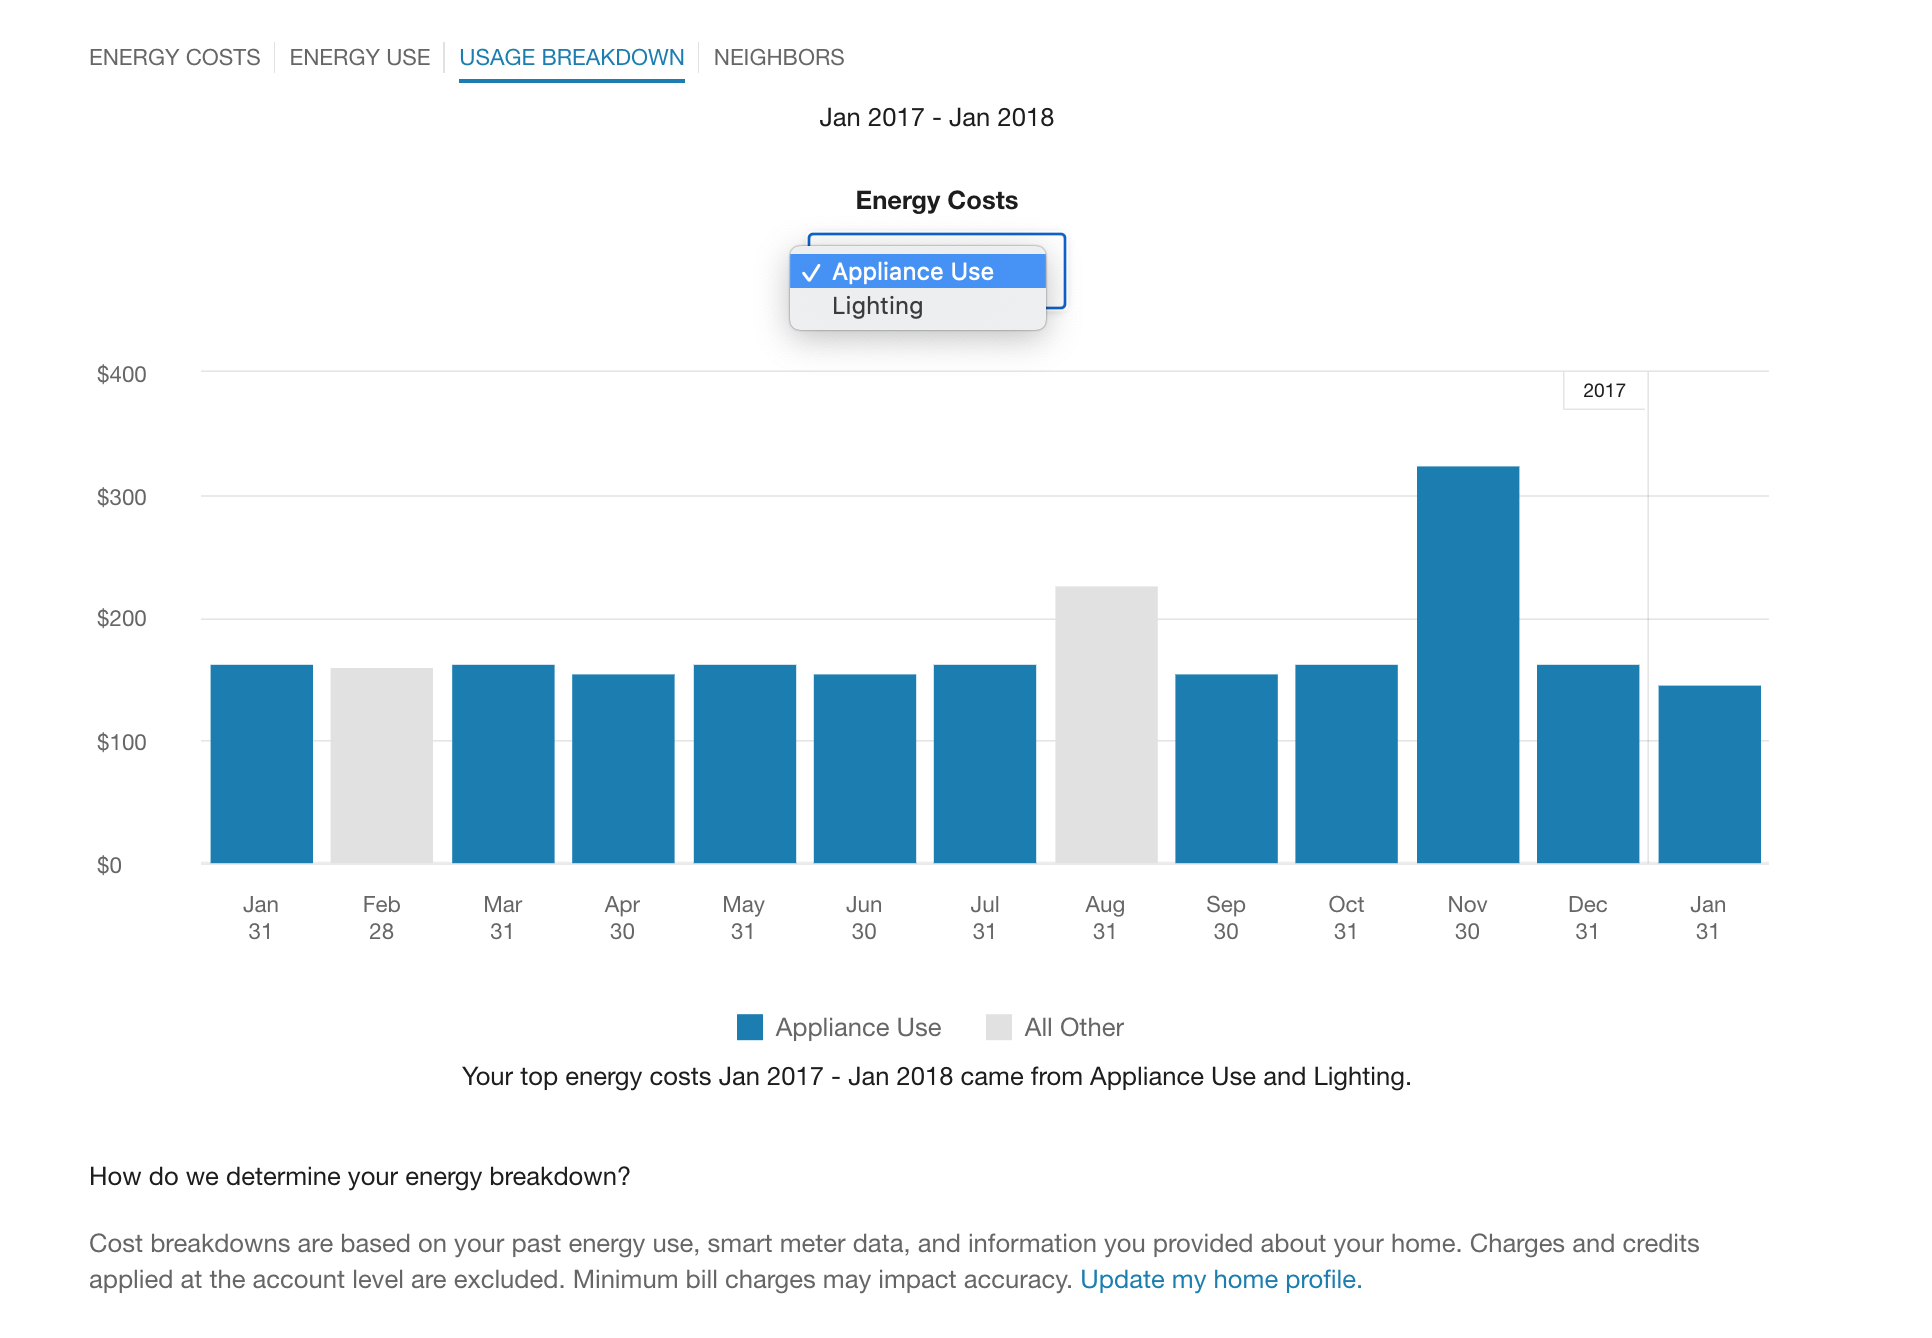 Image of Usage Breakdown tab showing Appliance use and Lighting as options under Energy Costs